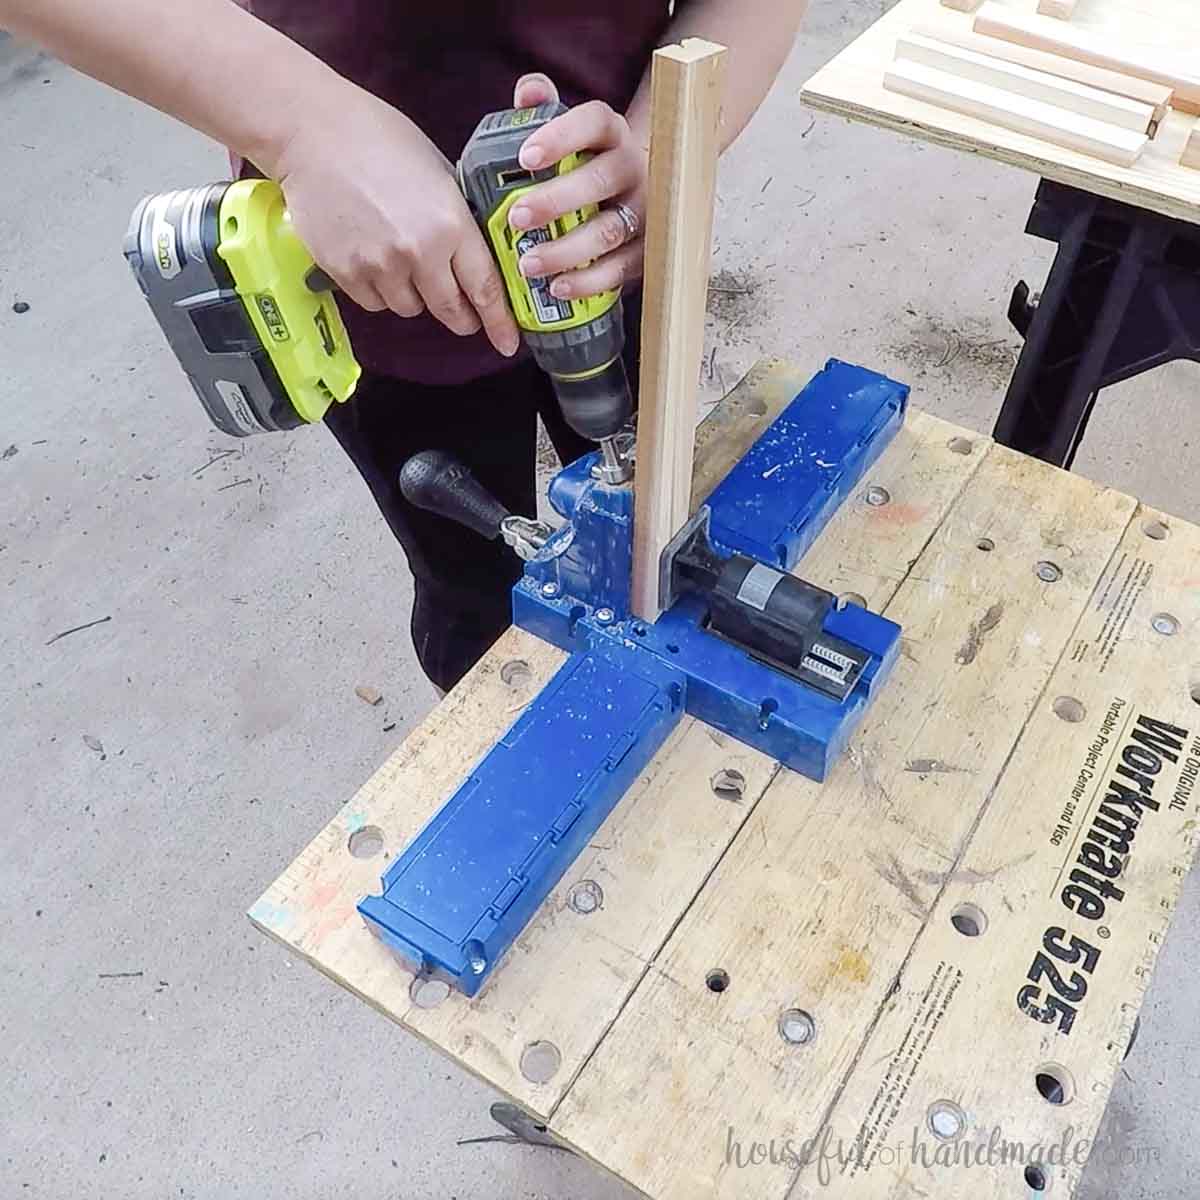 Drilling pocket holes in a board. 